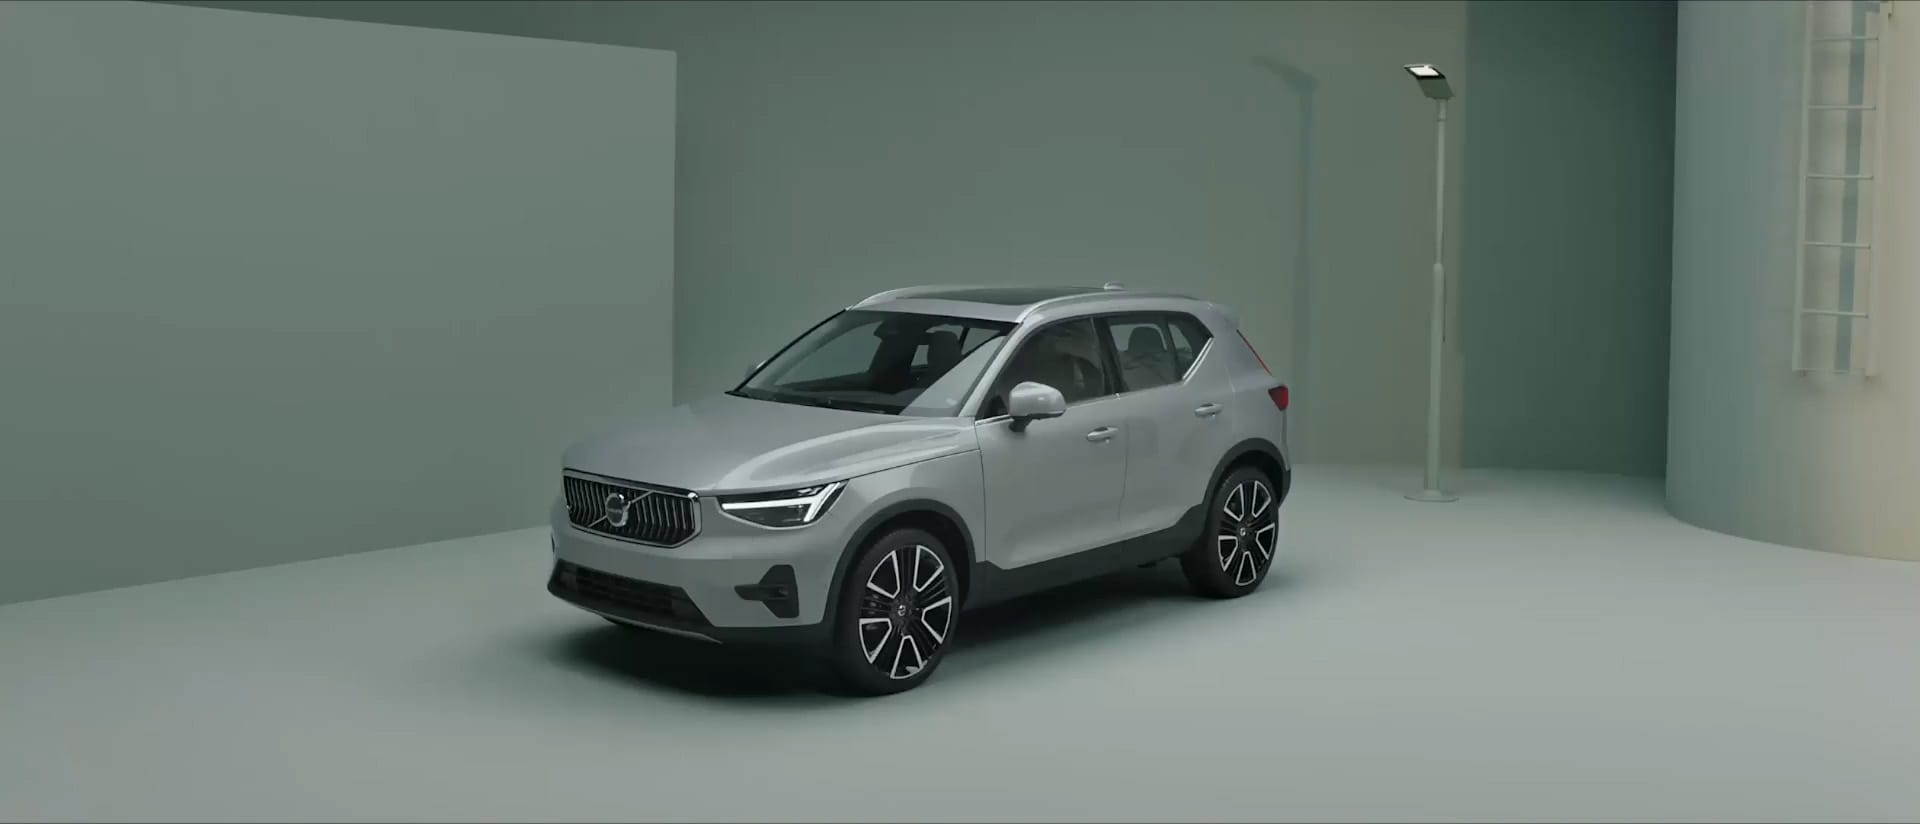 https://www.volvocars.com/images/v/-/media/applications/pdpspecificationpage/xc40-fuel/pdp/xc40-fuel-hero-21x9.jpg?h=824&iar=0&w=1920